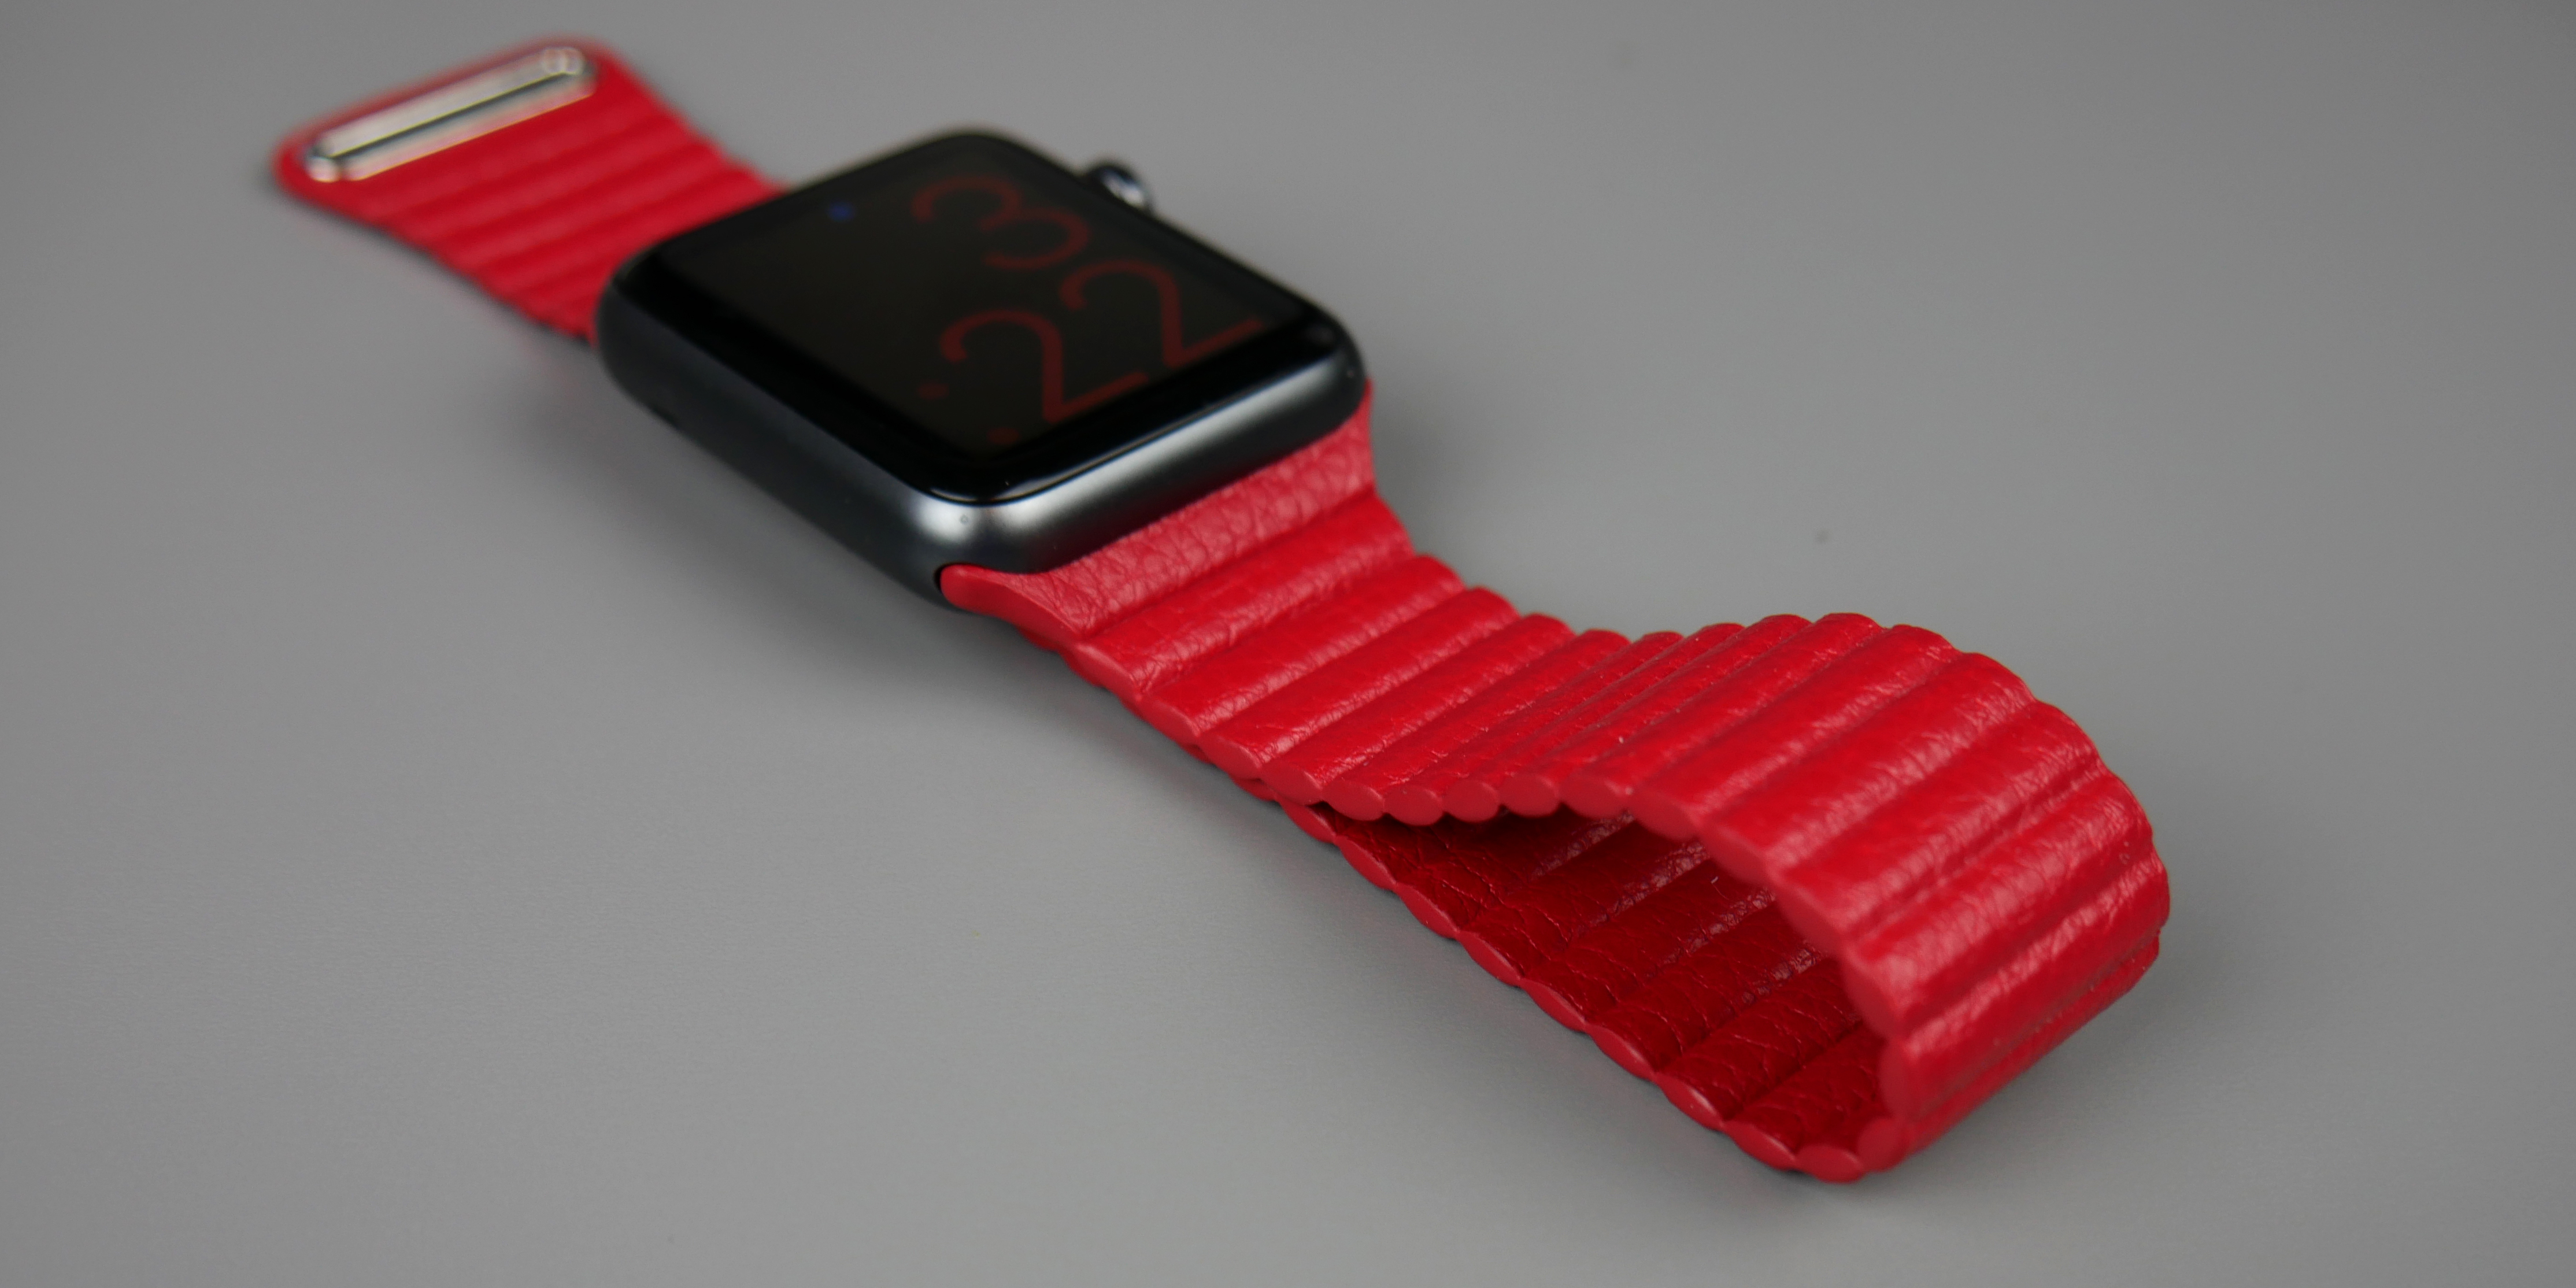 Review At Just 24 This Leather Loop Band For Apple Watch Looks Great And Won T Break The Bank Gallery 9to5toys